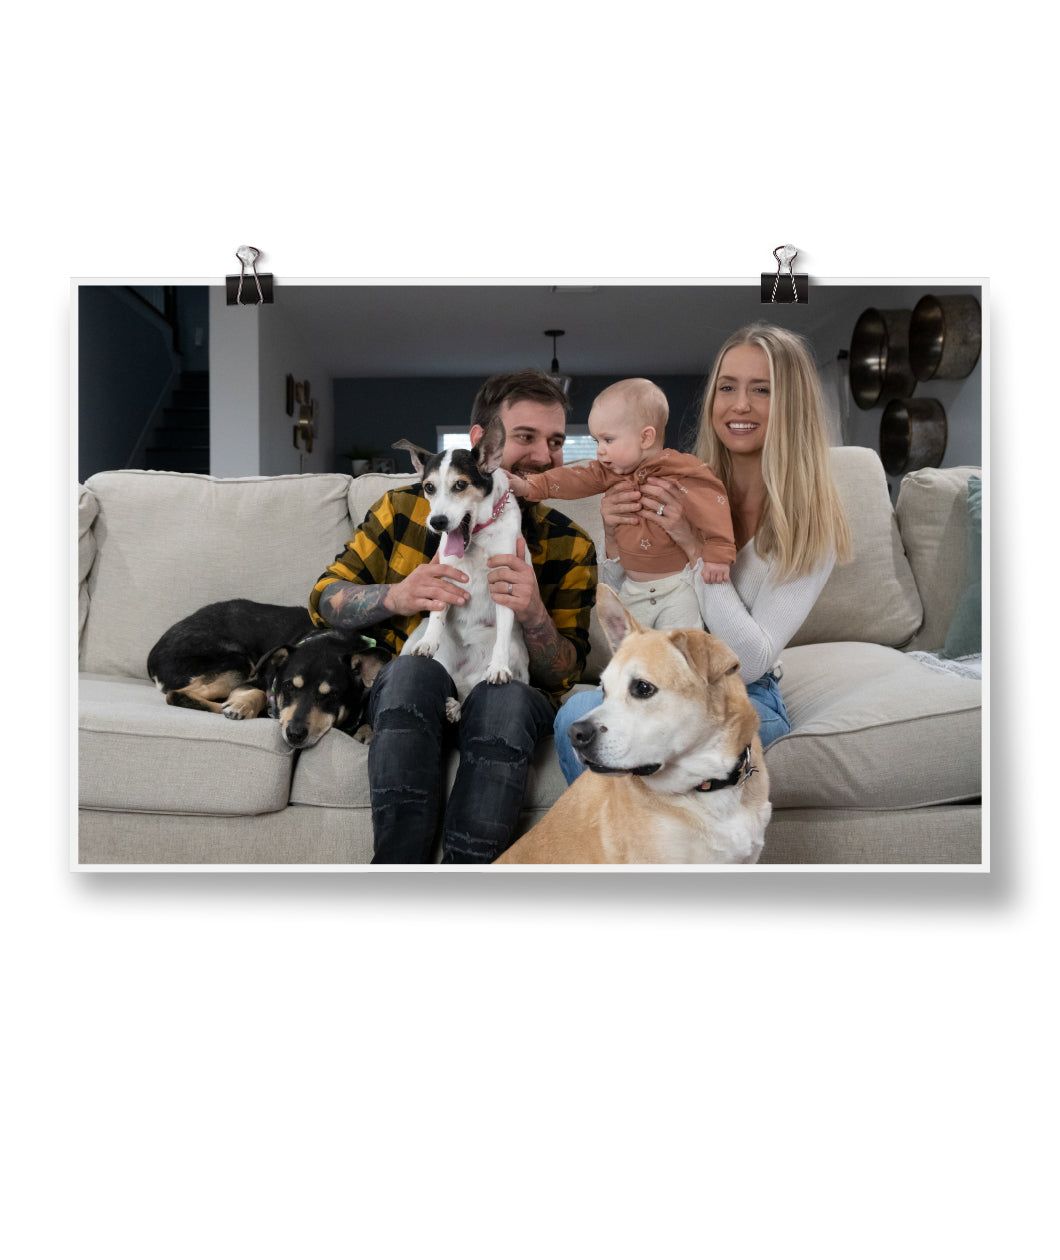 A photo of a couple, their baby, and their 3 dogs sitting on a couch - by Charles Trippy